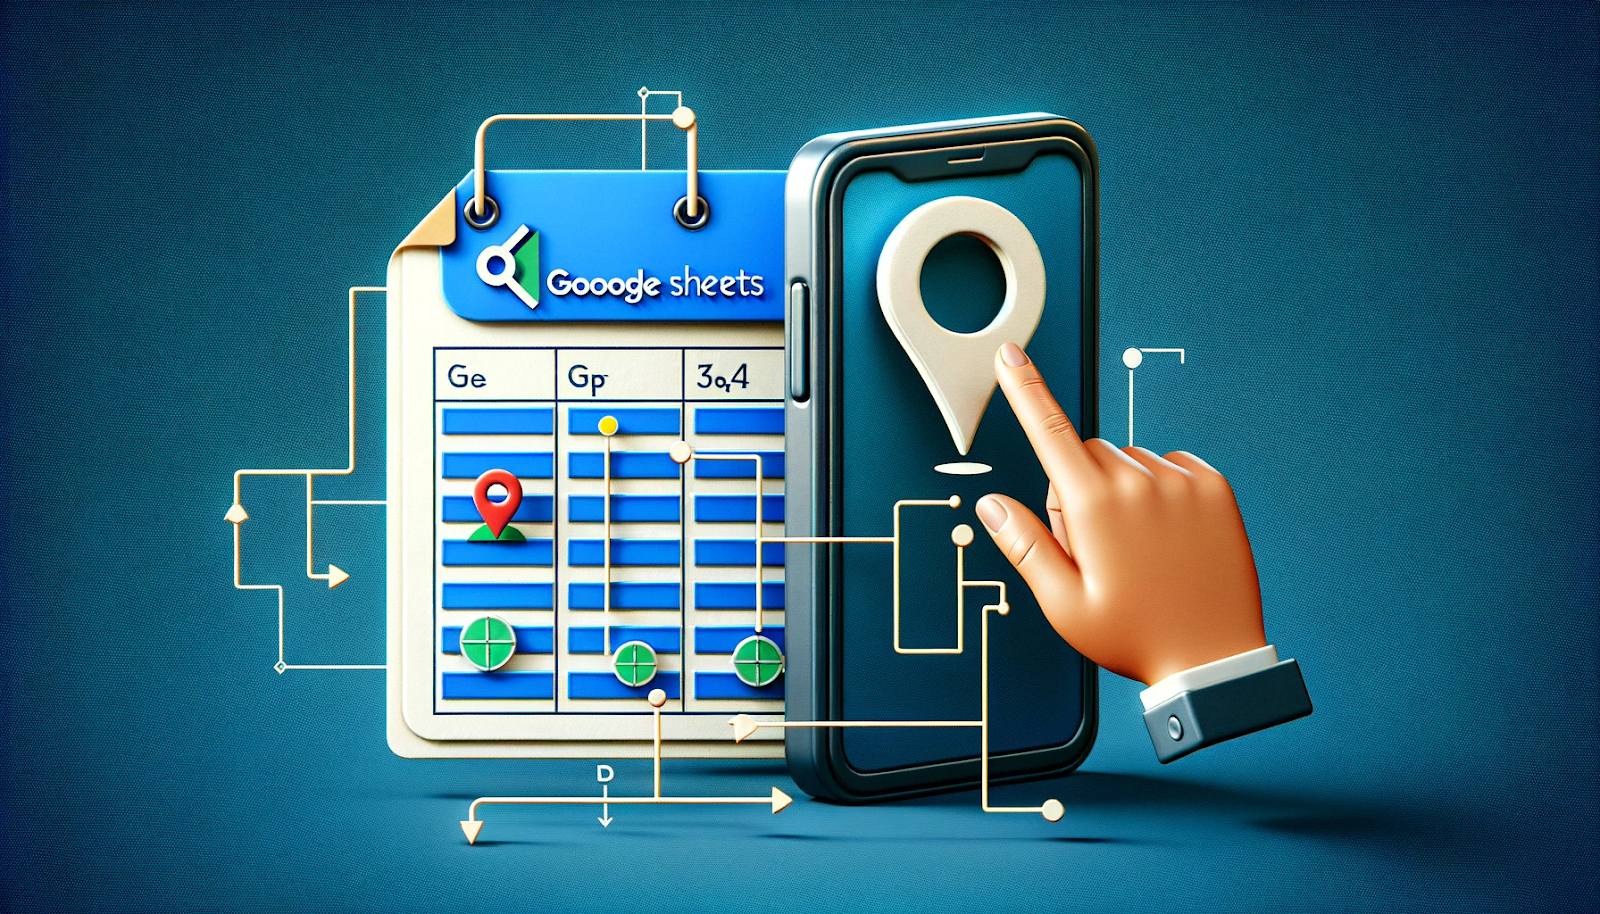 An illustrated hand interacts with a smartphone screen displaying a location pin icon, symbolizing geolocation services. In the background, a Google Sheets document with data points and charts connects to the phone, representing the integration of data management and mapping technology.